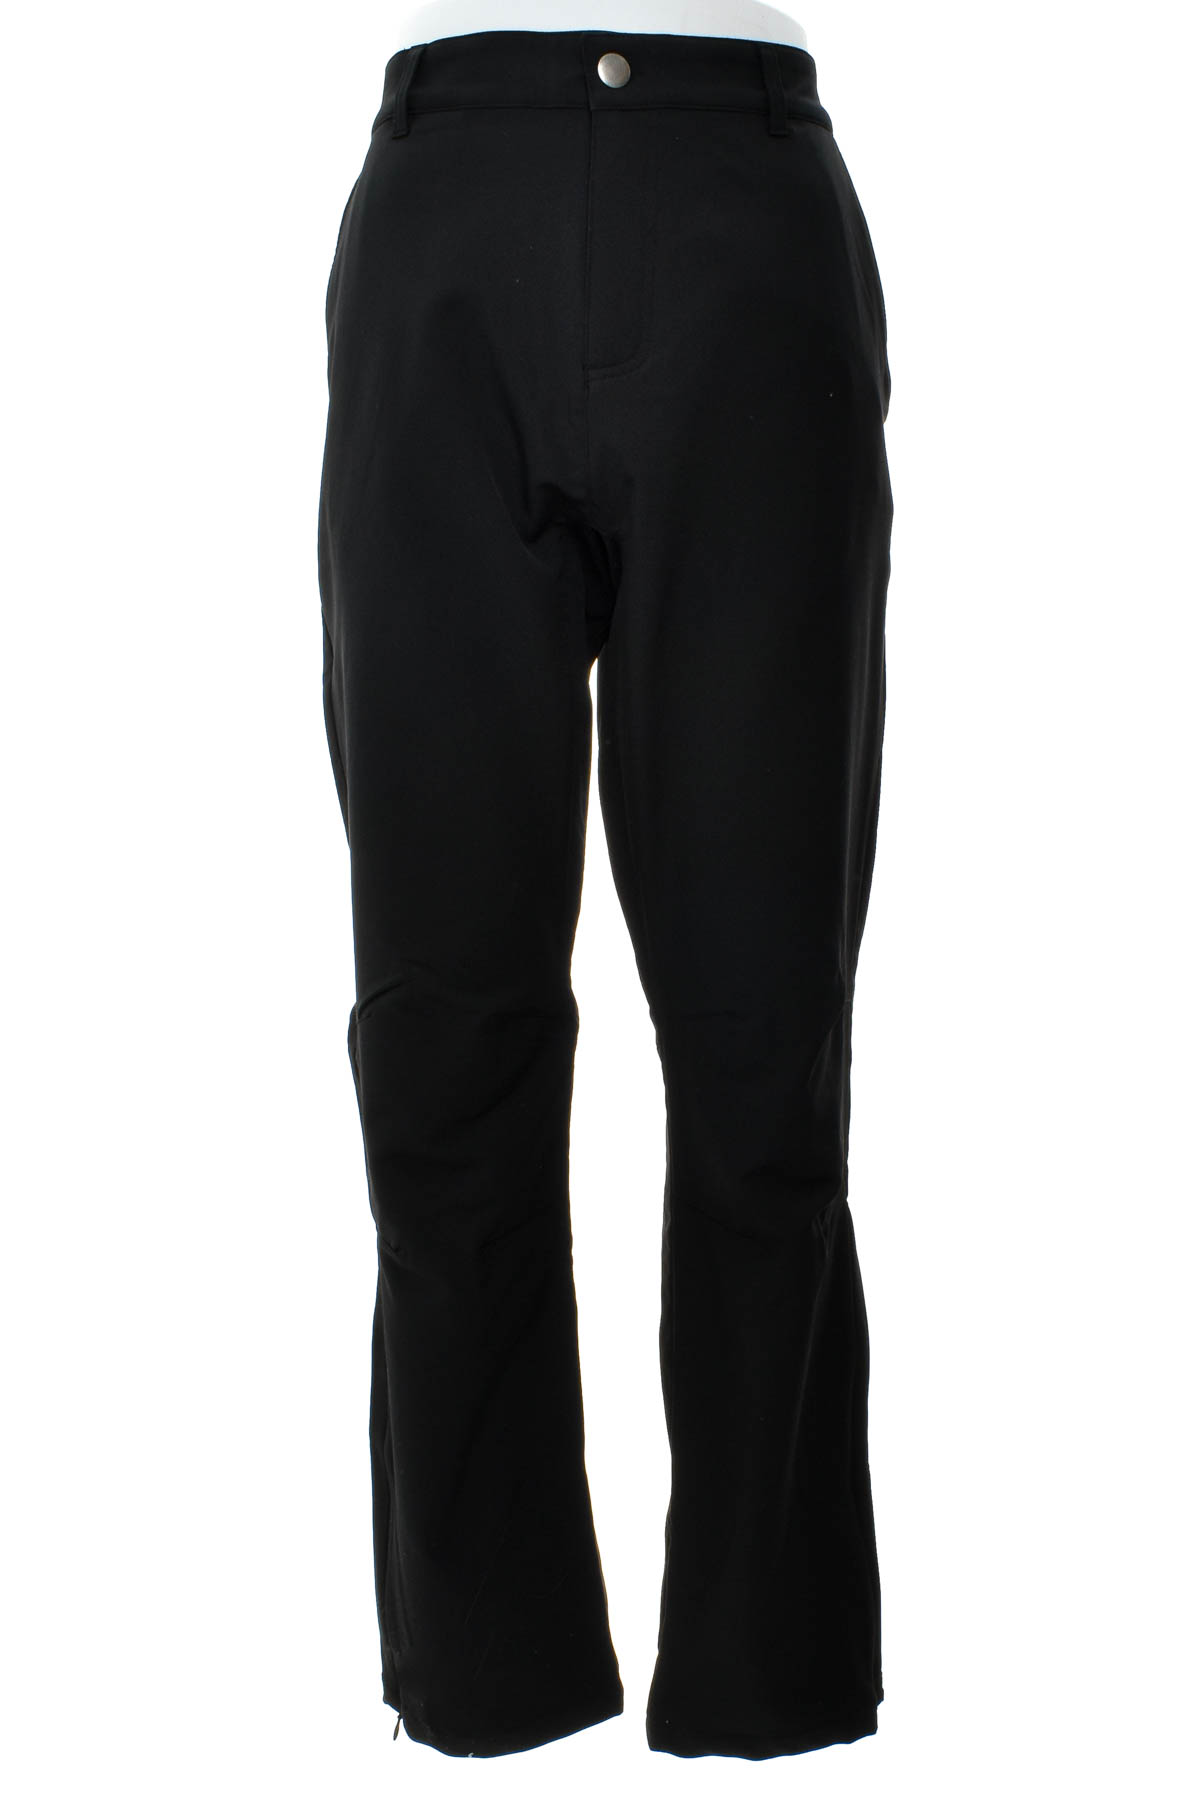 Men's trousers - Active by Tchibo - 0